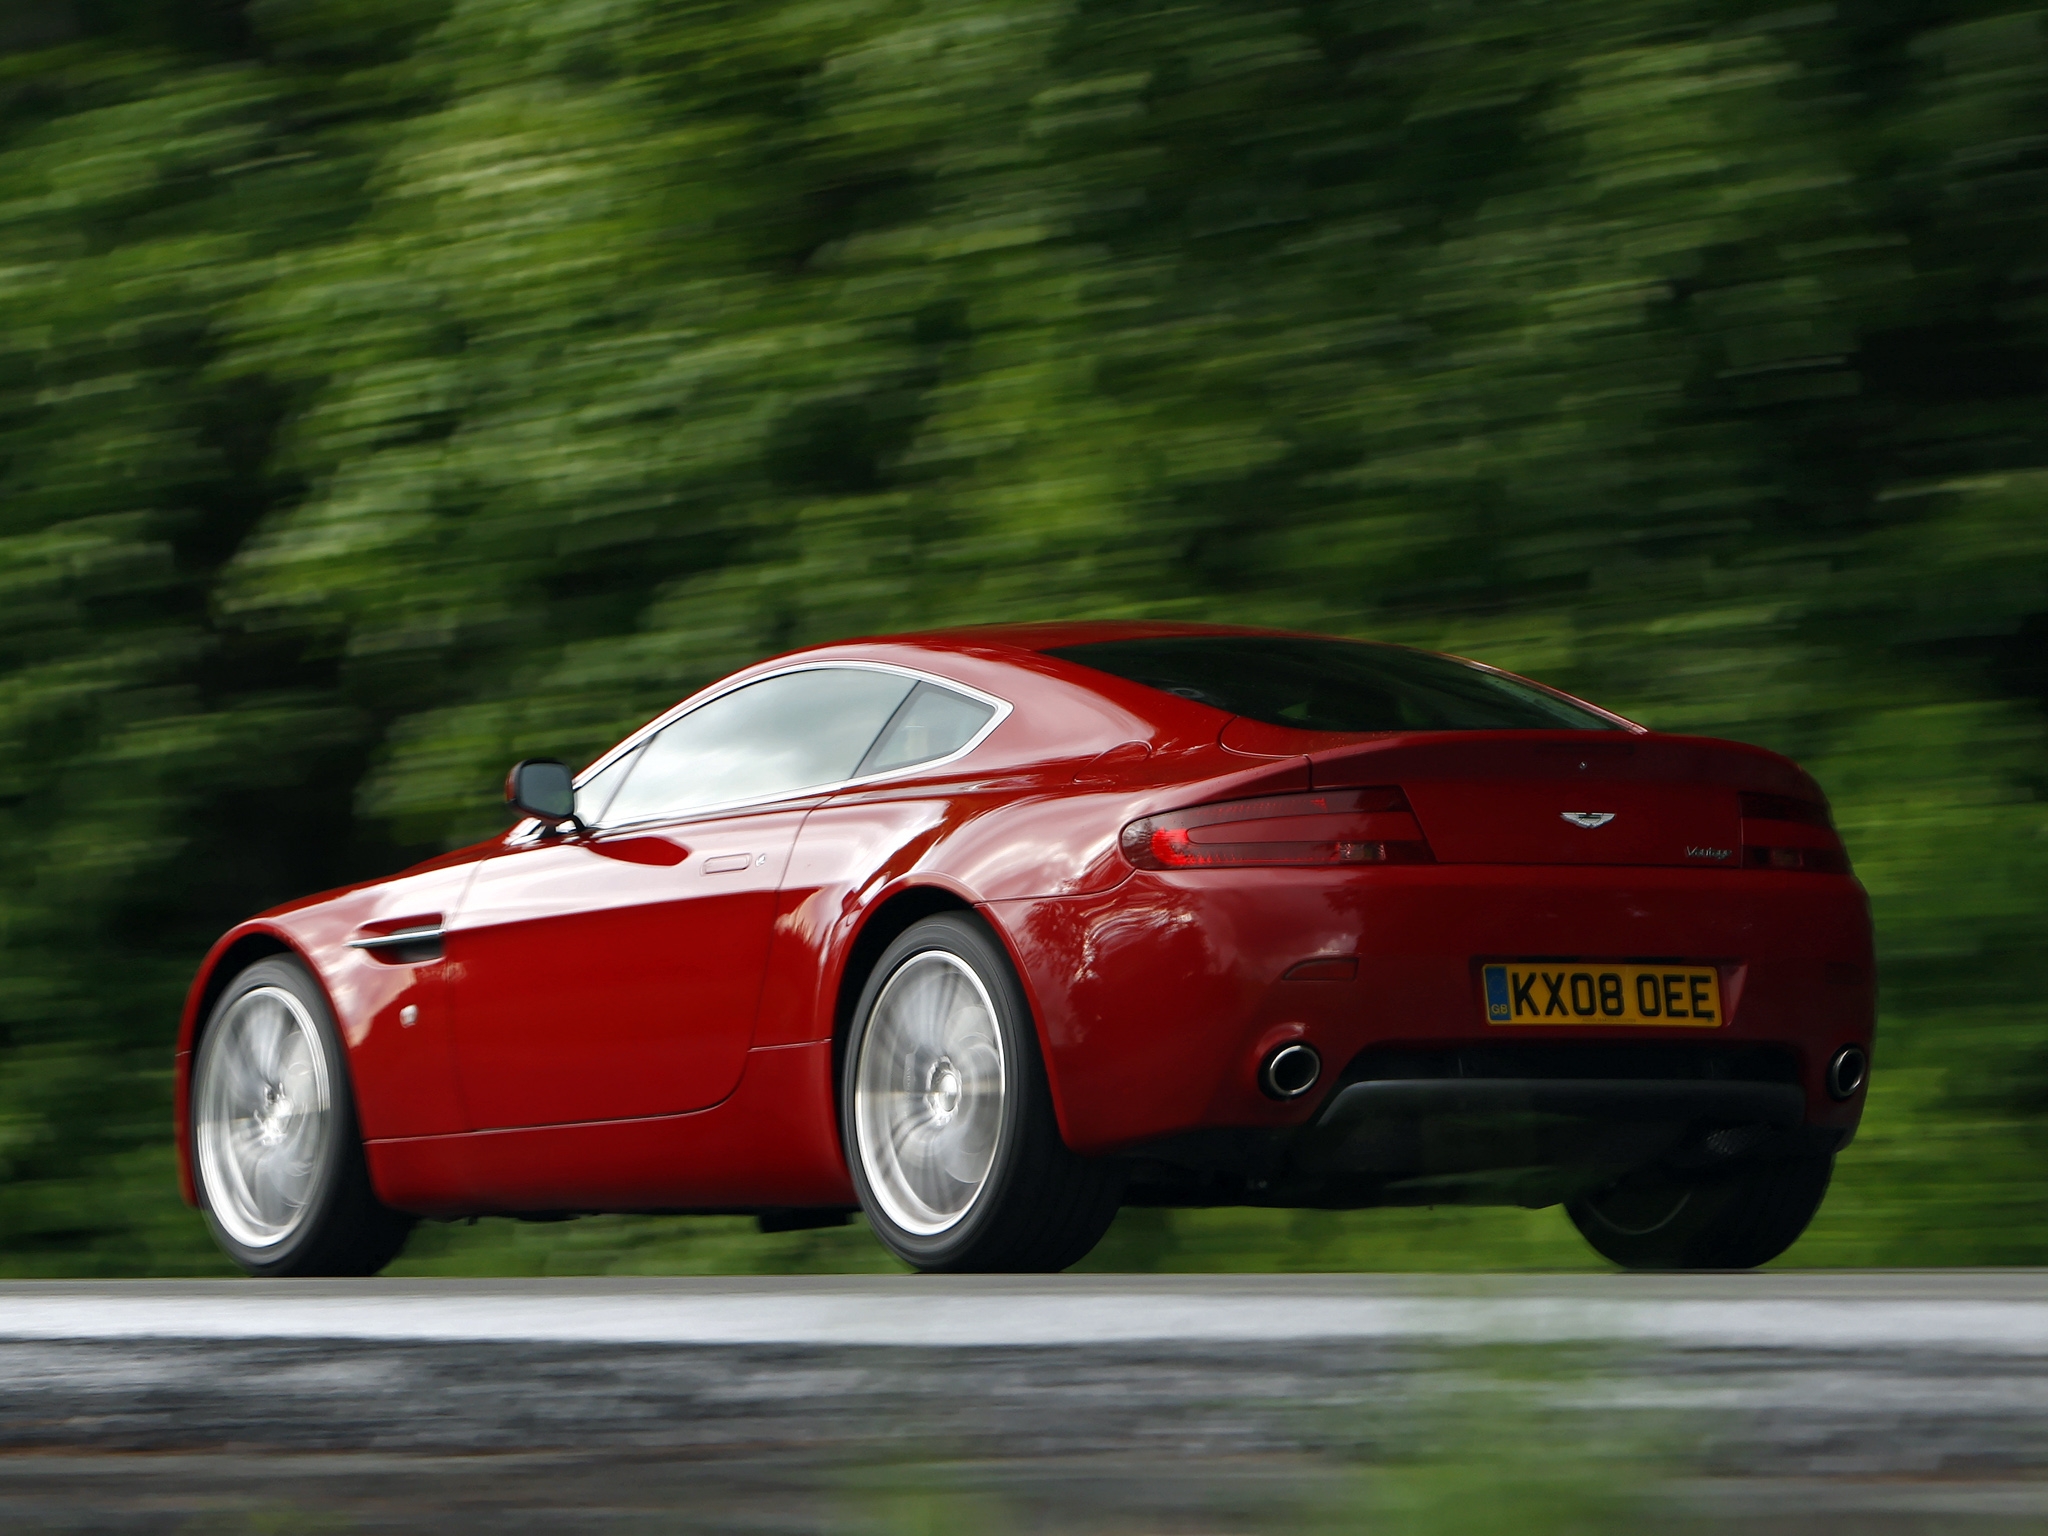 trees, aston martin, cars, red, side view, 2008, v8, vantage lock screen backgrounds